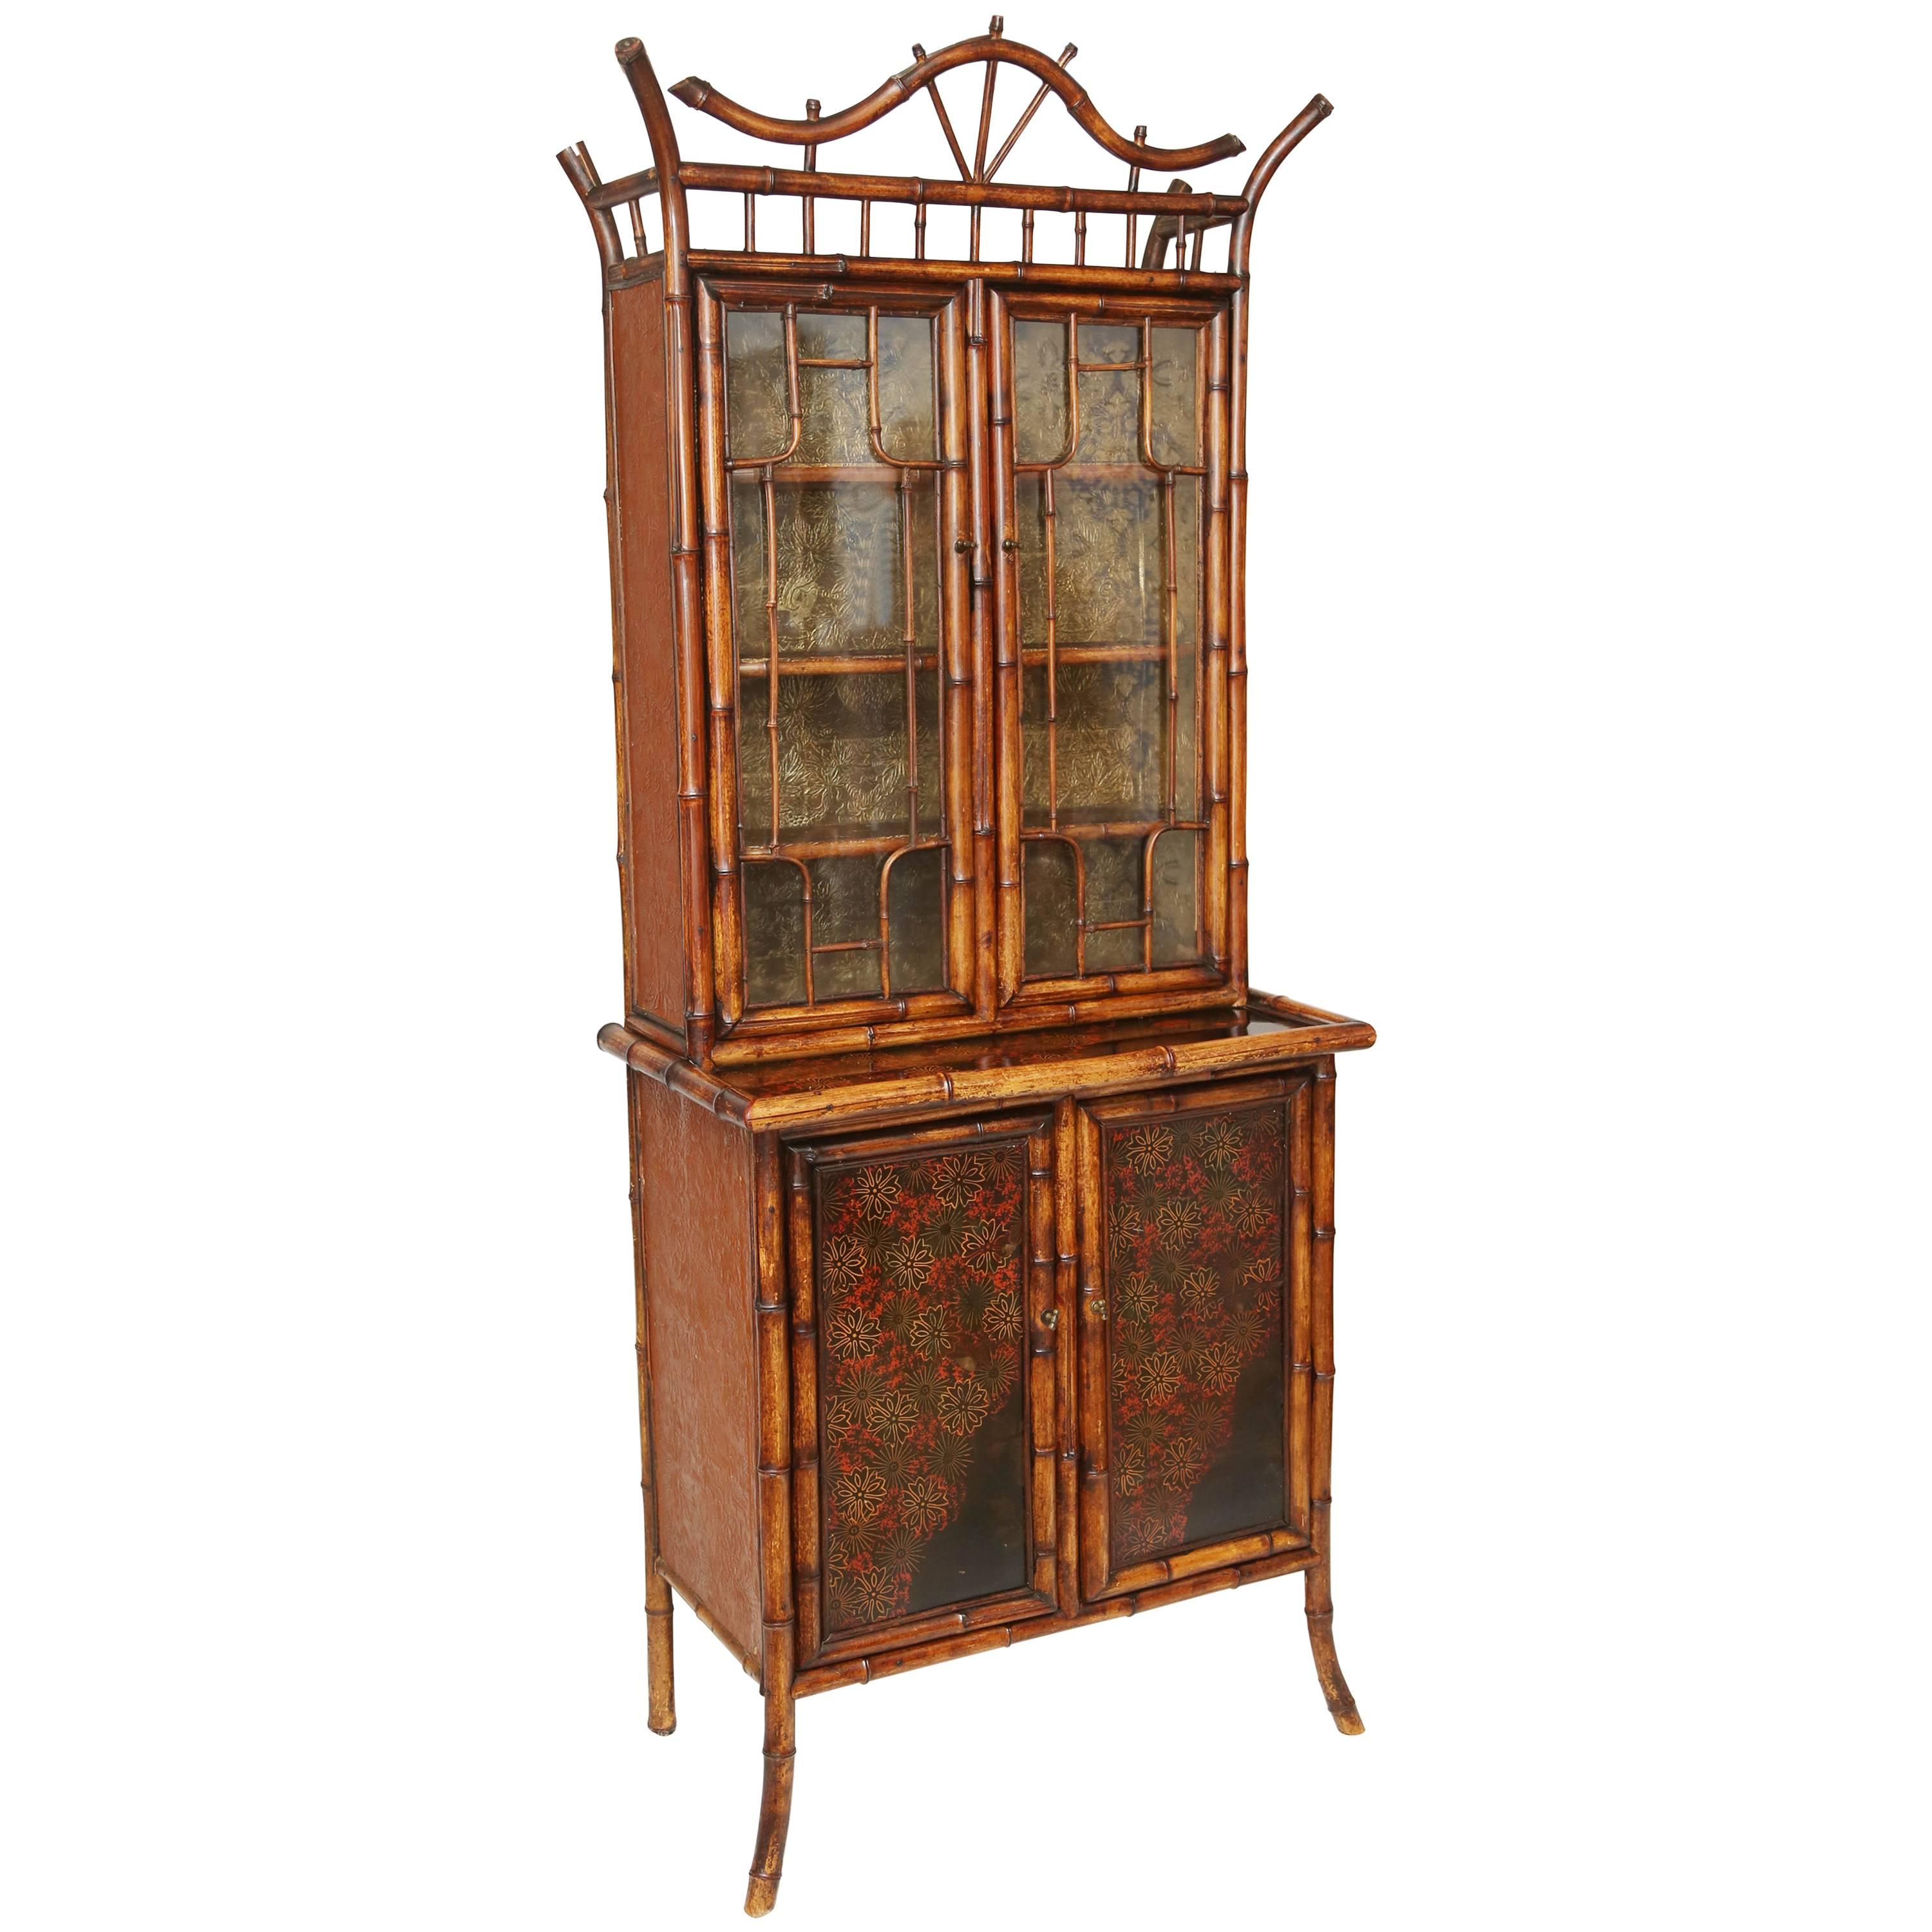 Beautiful 19th Century English Bamboo Cabinet or Bookcase